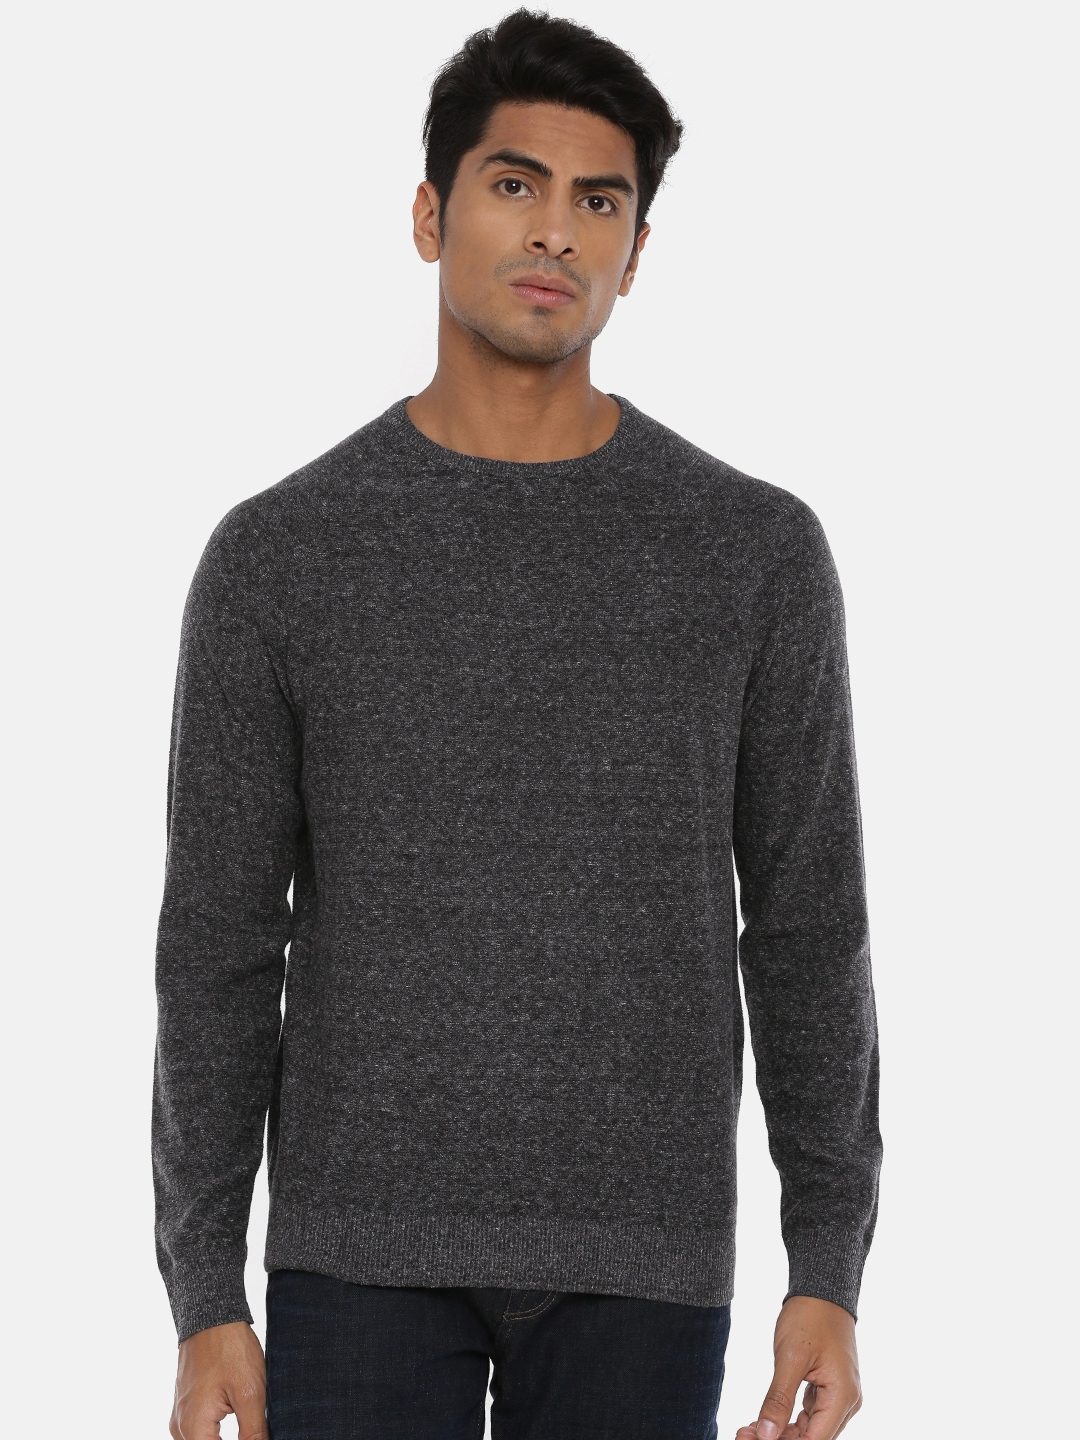 Buy SELECTED Men Charcoal Grey Solid Sweater - Sweaters for Men 9720837 ...